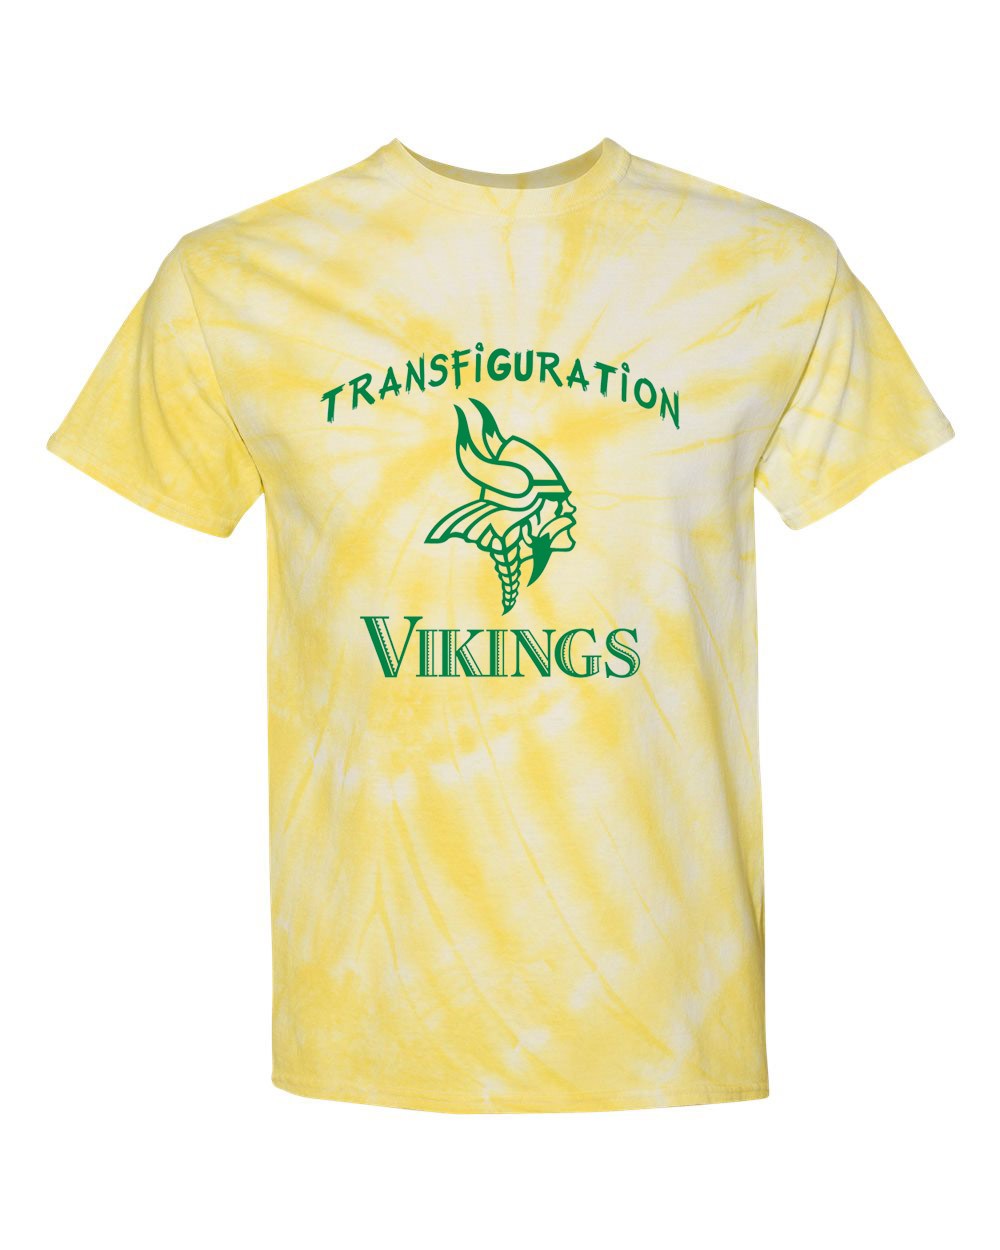 STAFF Transfiguration S/S Tie Dye T-Shirt w/ Logo - Please Allow 2-3 Weeks for Delivery